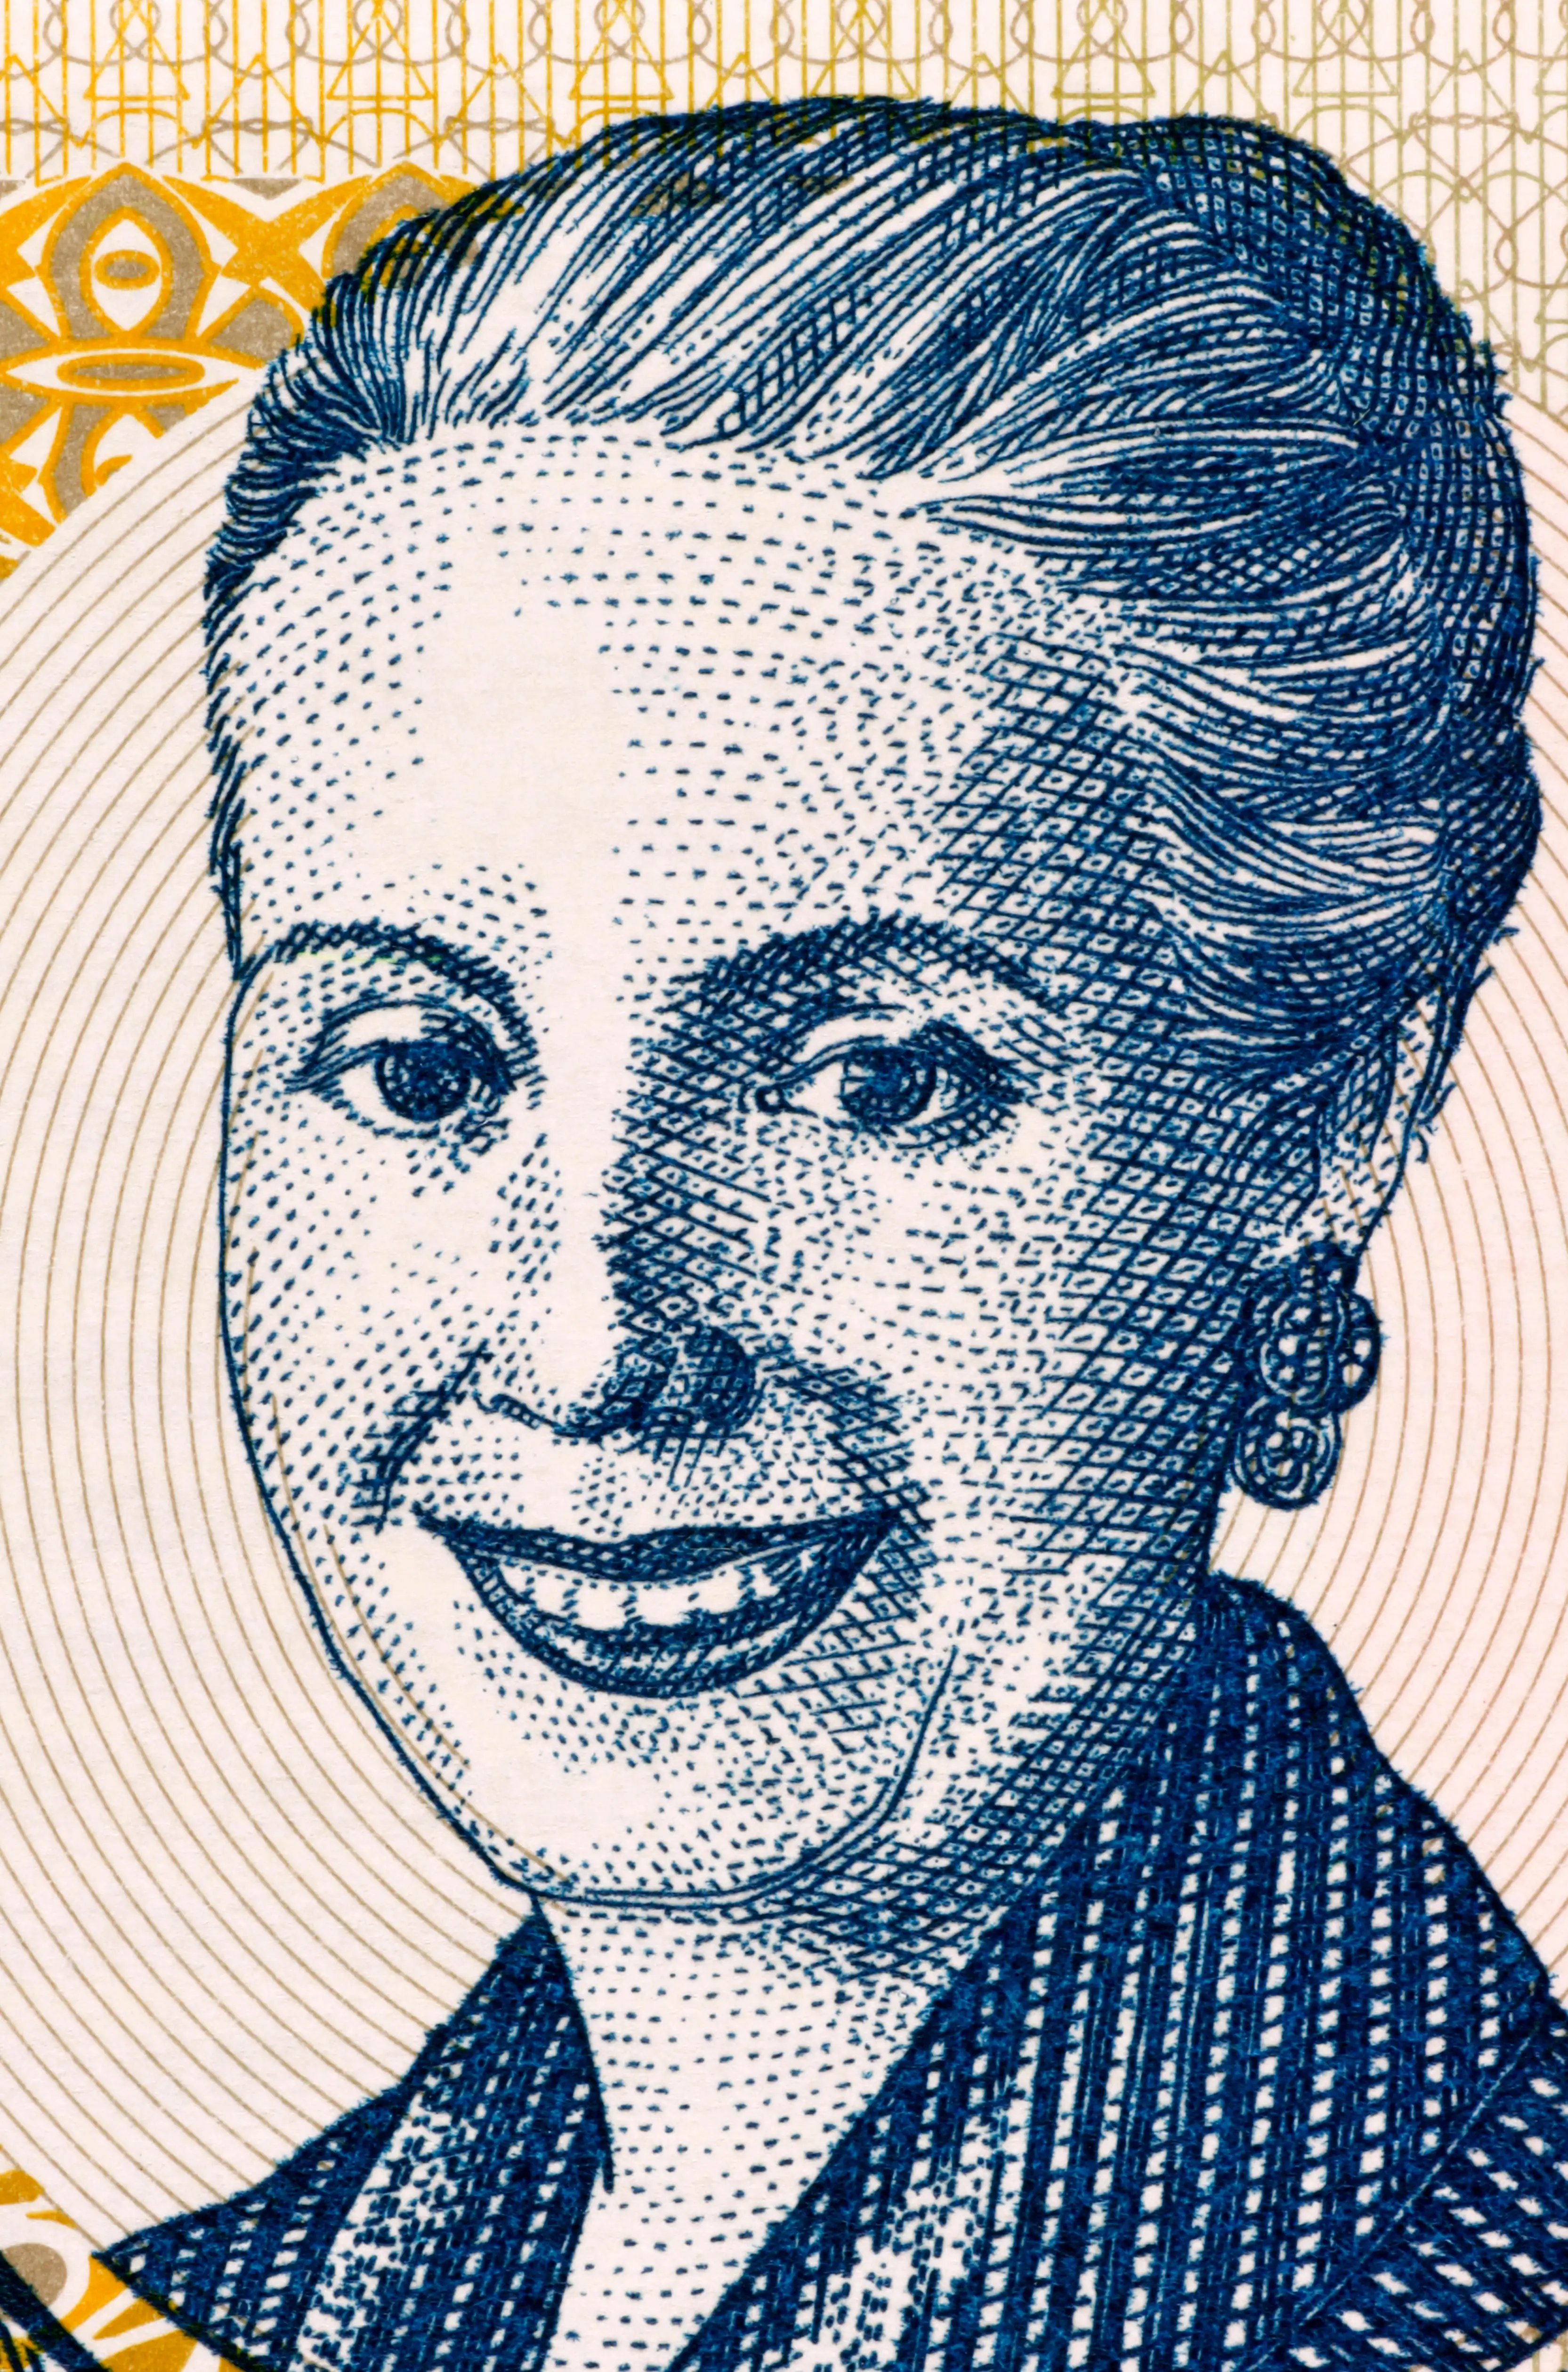 Eva Peron (1919-1952) on 2 Pesos 2001 Banknote from Argentina. Second wife of President Juan Peron.